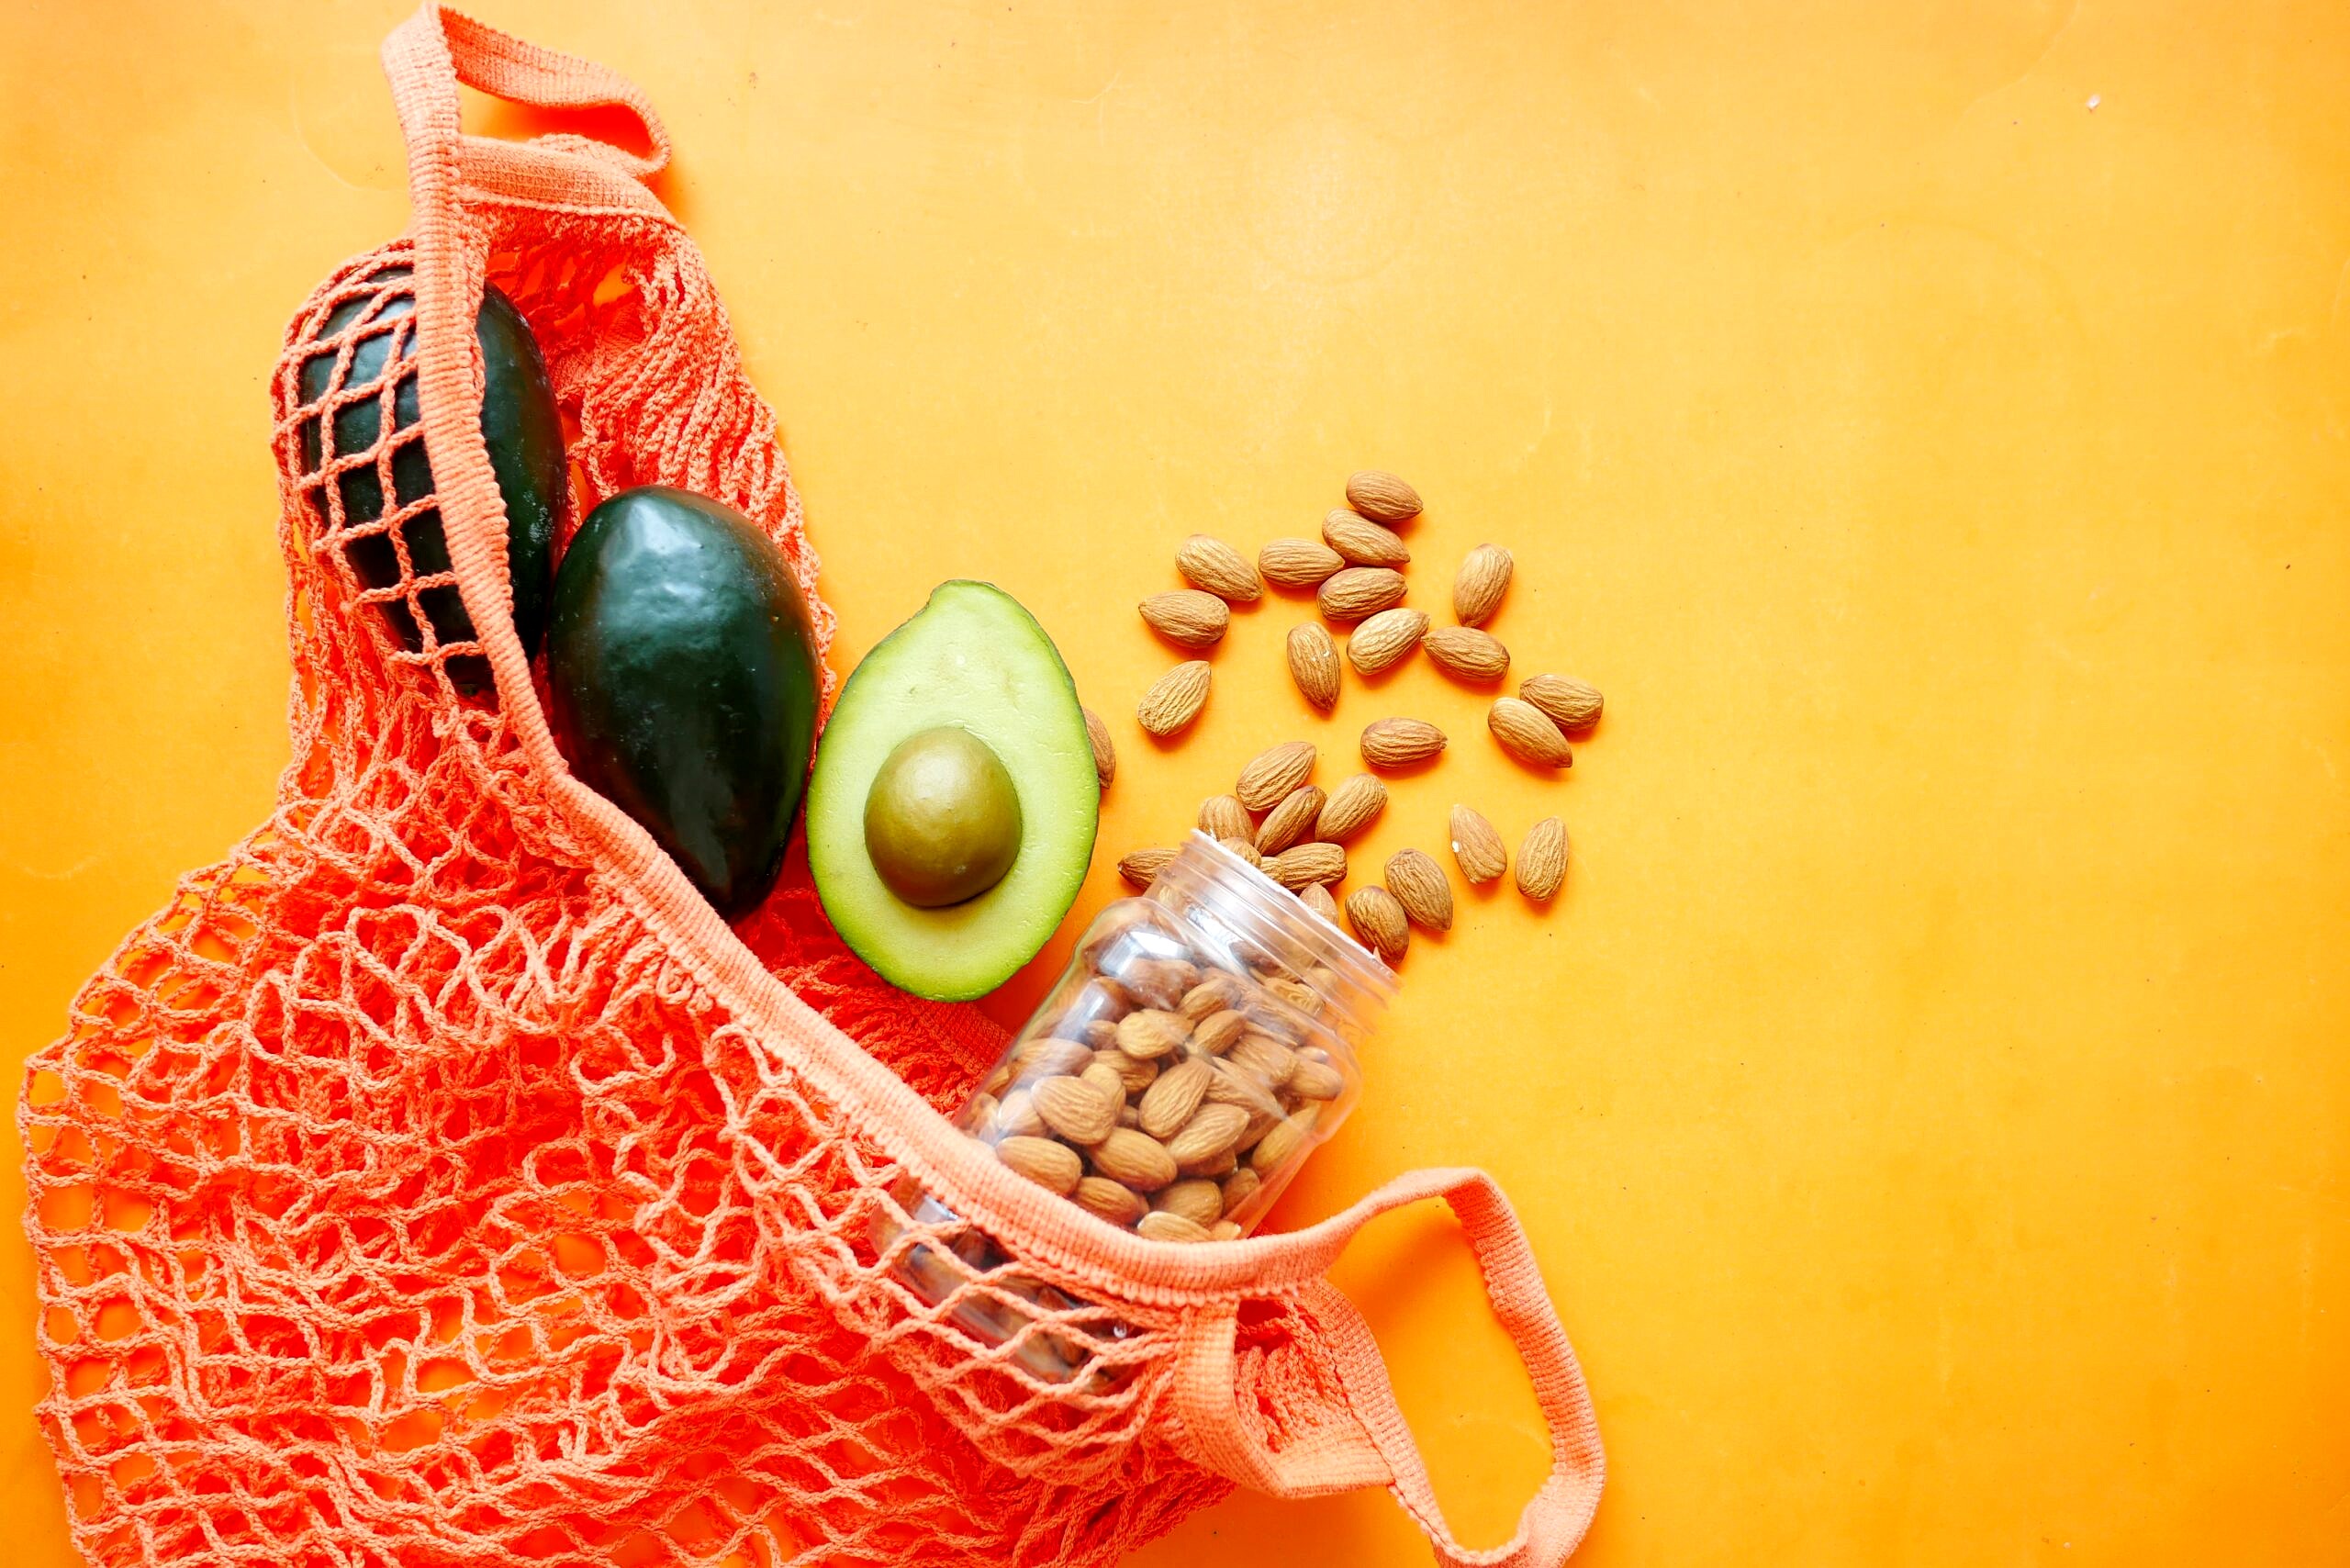 Avocado and almonds in a red bag on an orange background.